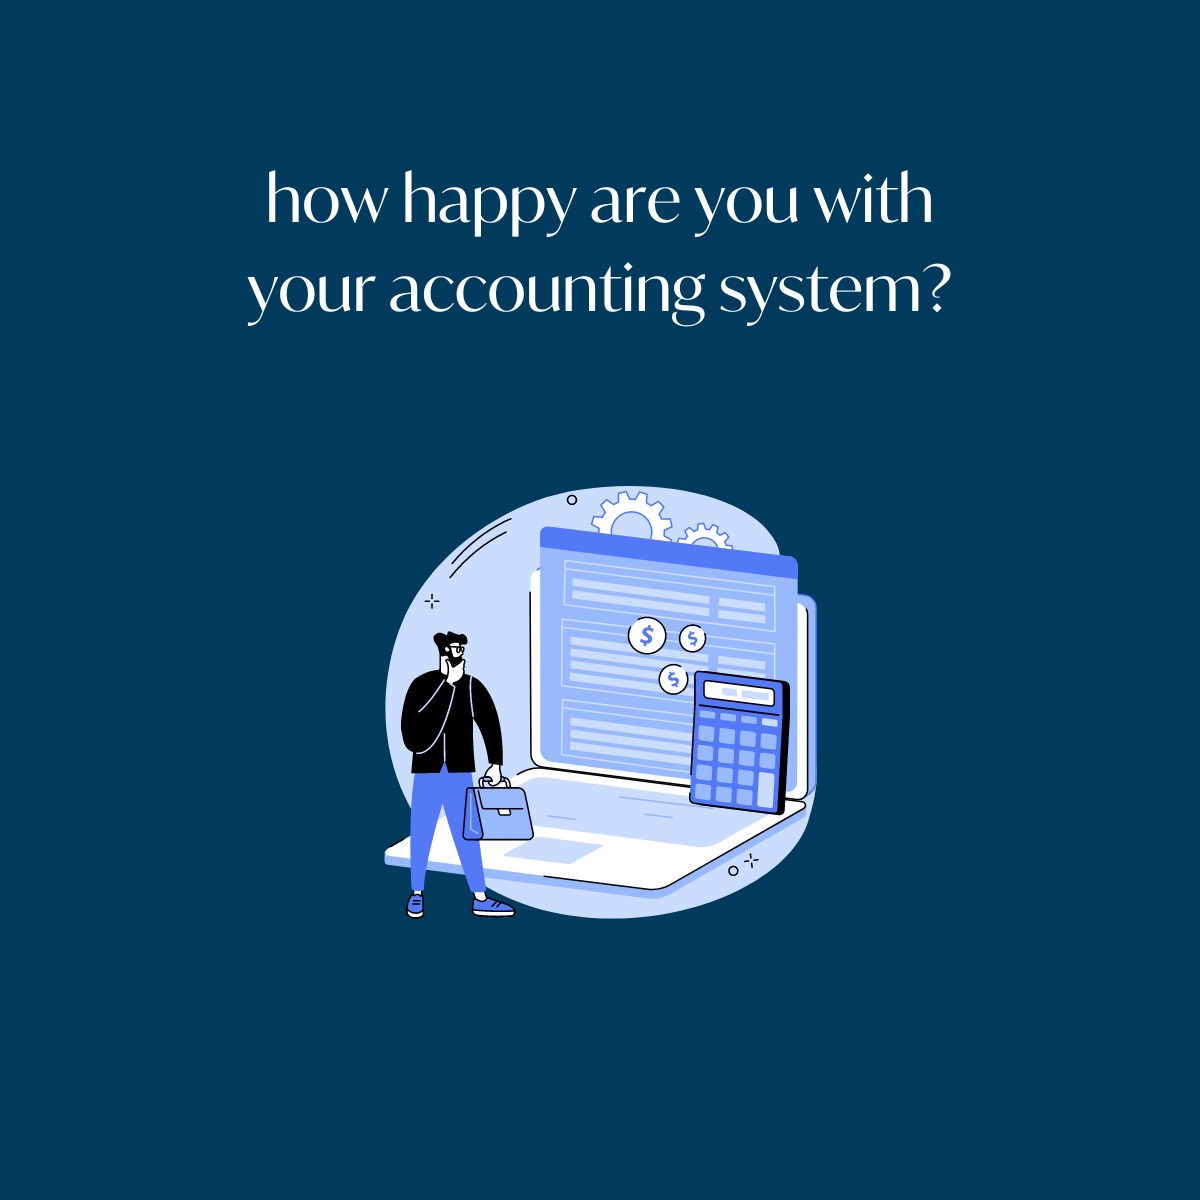 How Happy Are You With Your Accounting System?